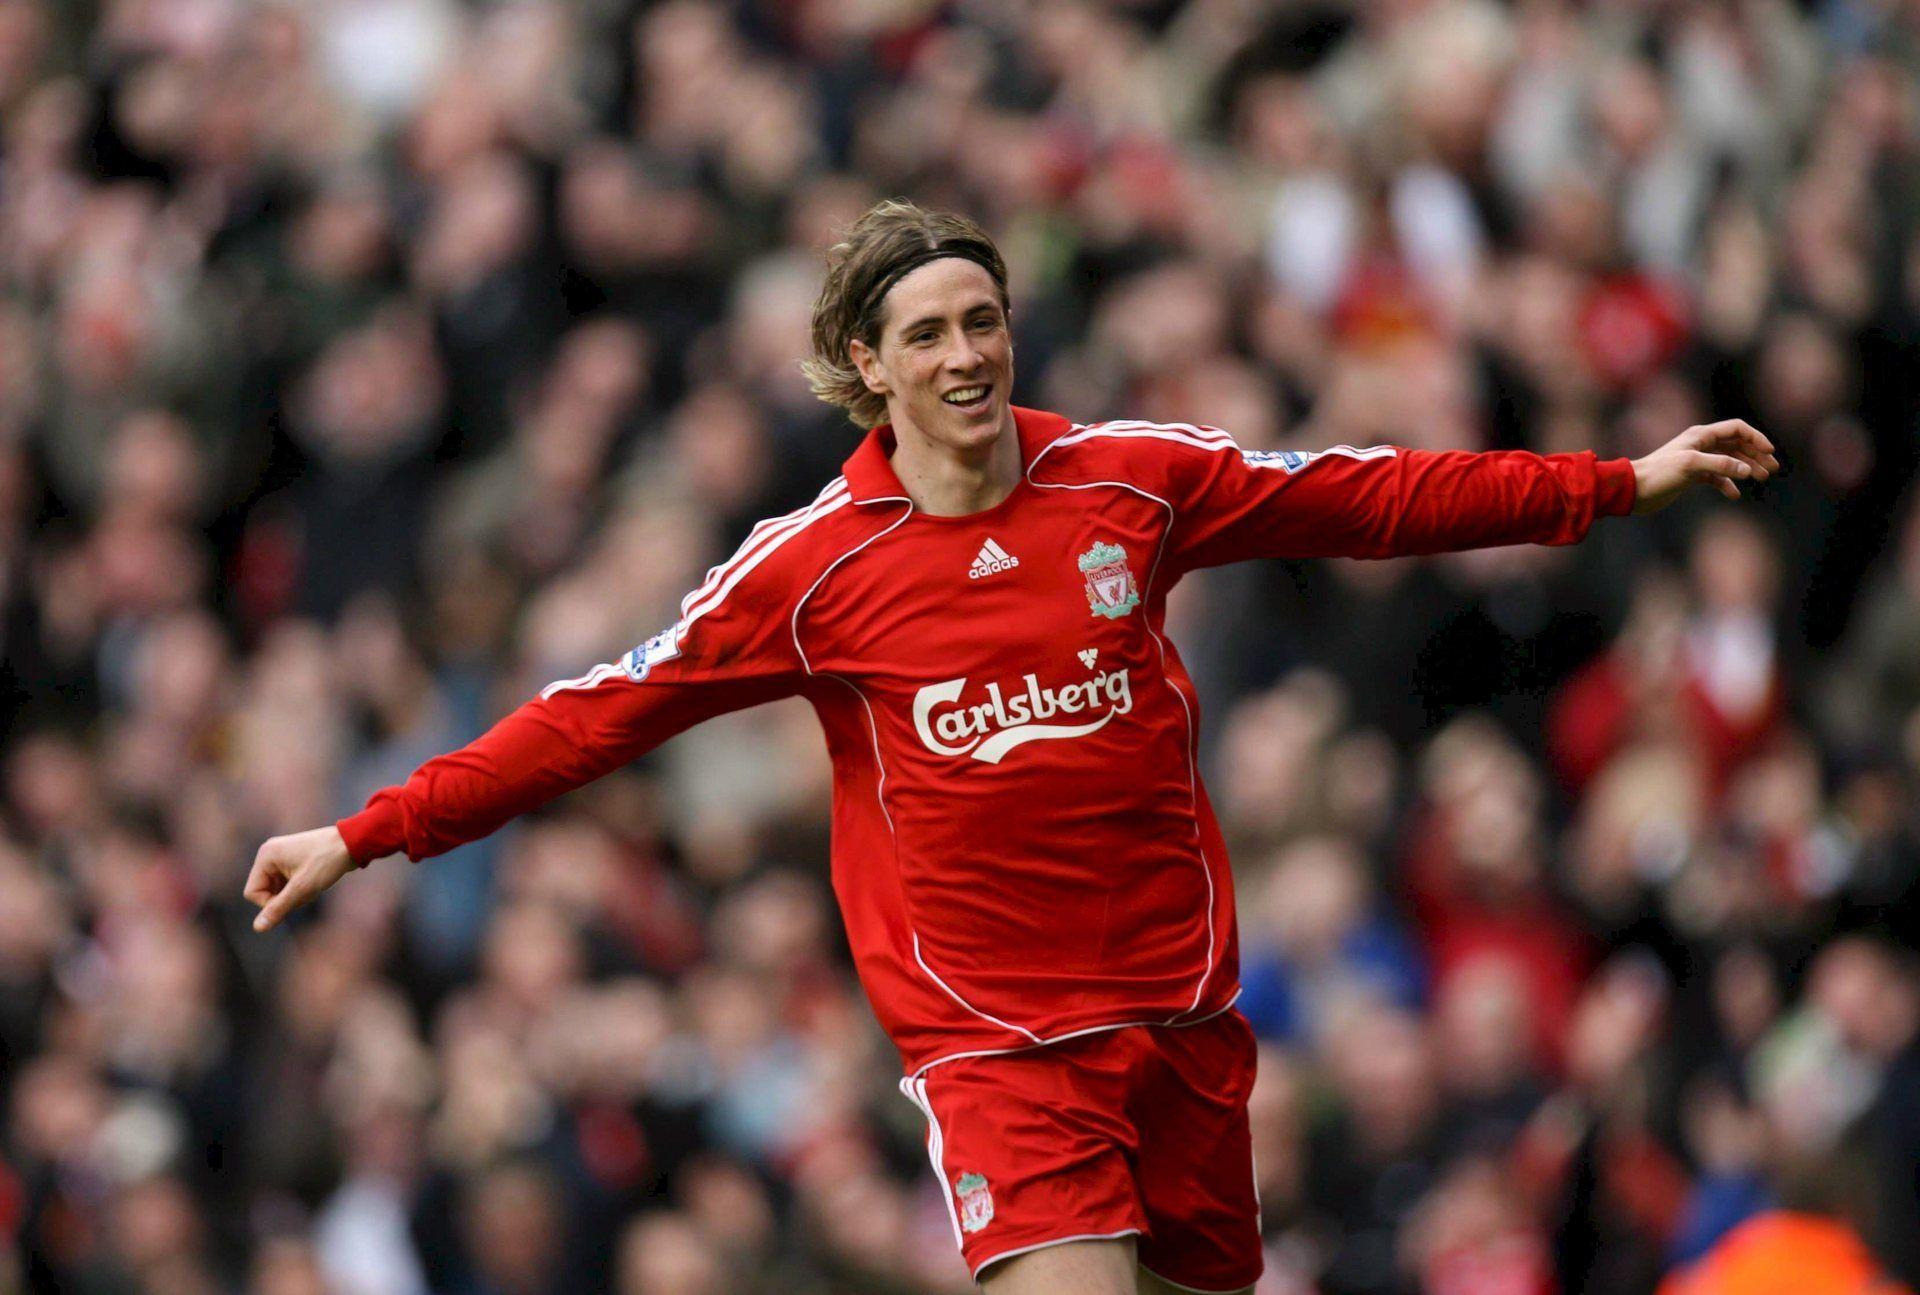 Liverpool F.C. image Fernando Torres HD wallpapers and backgrounds.